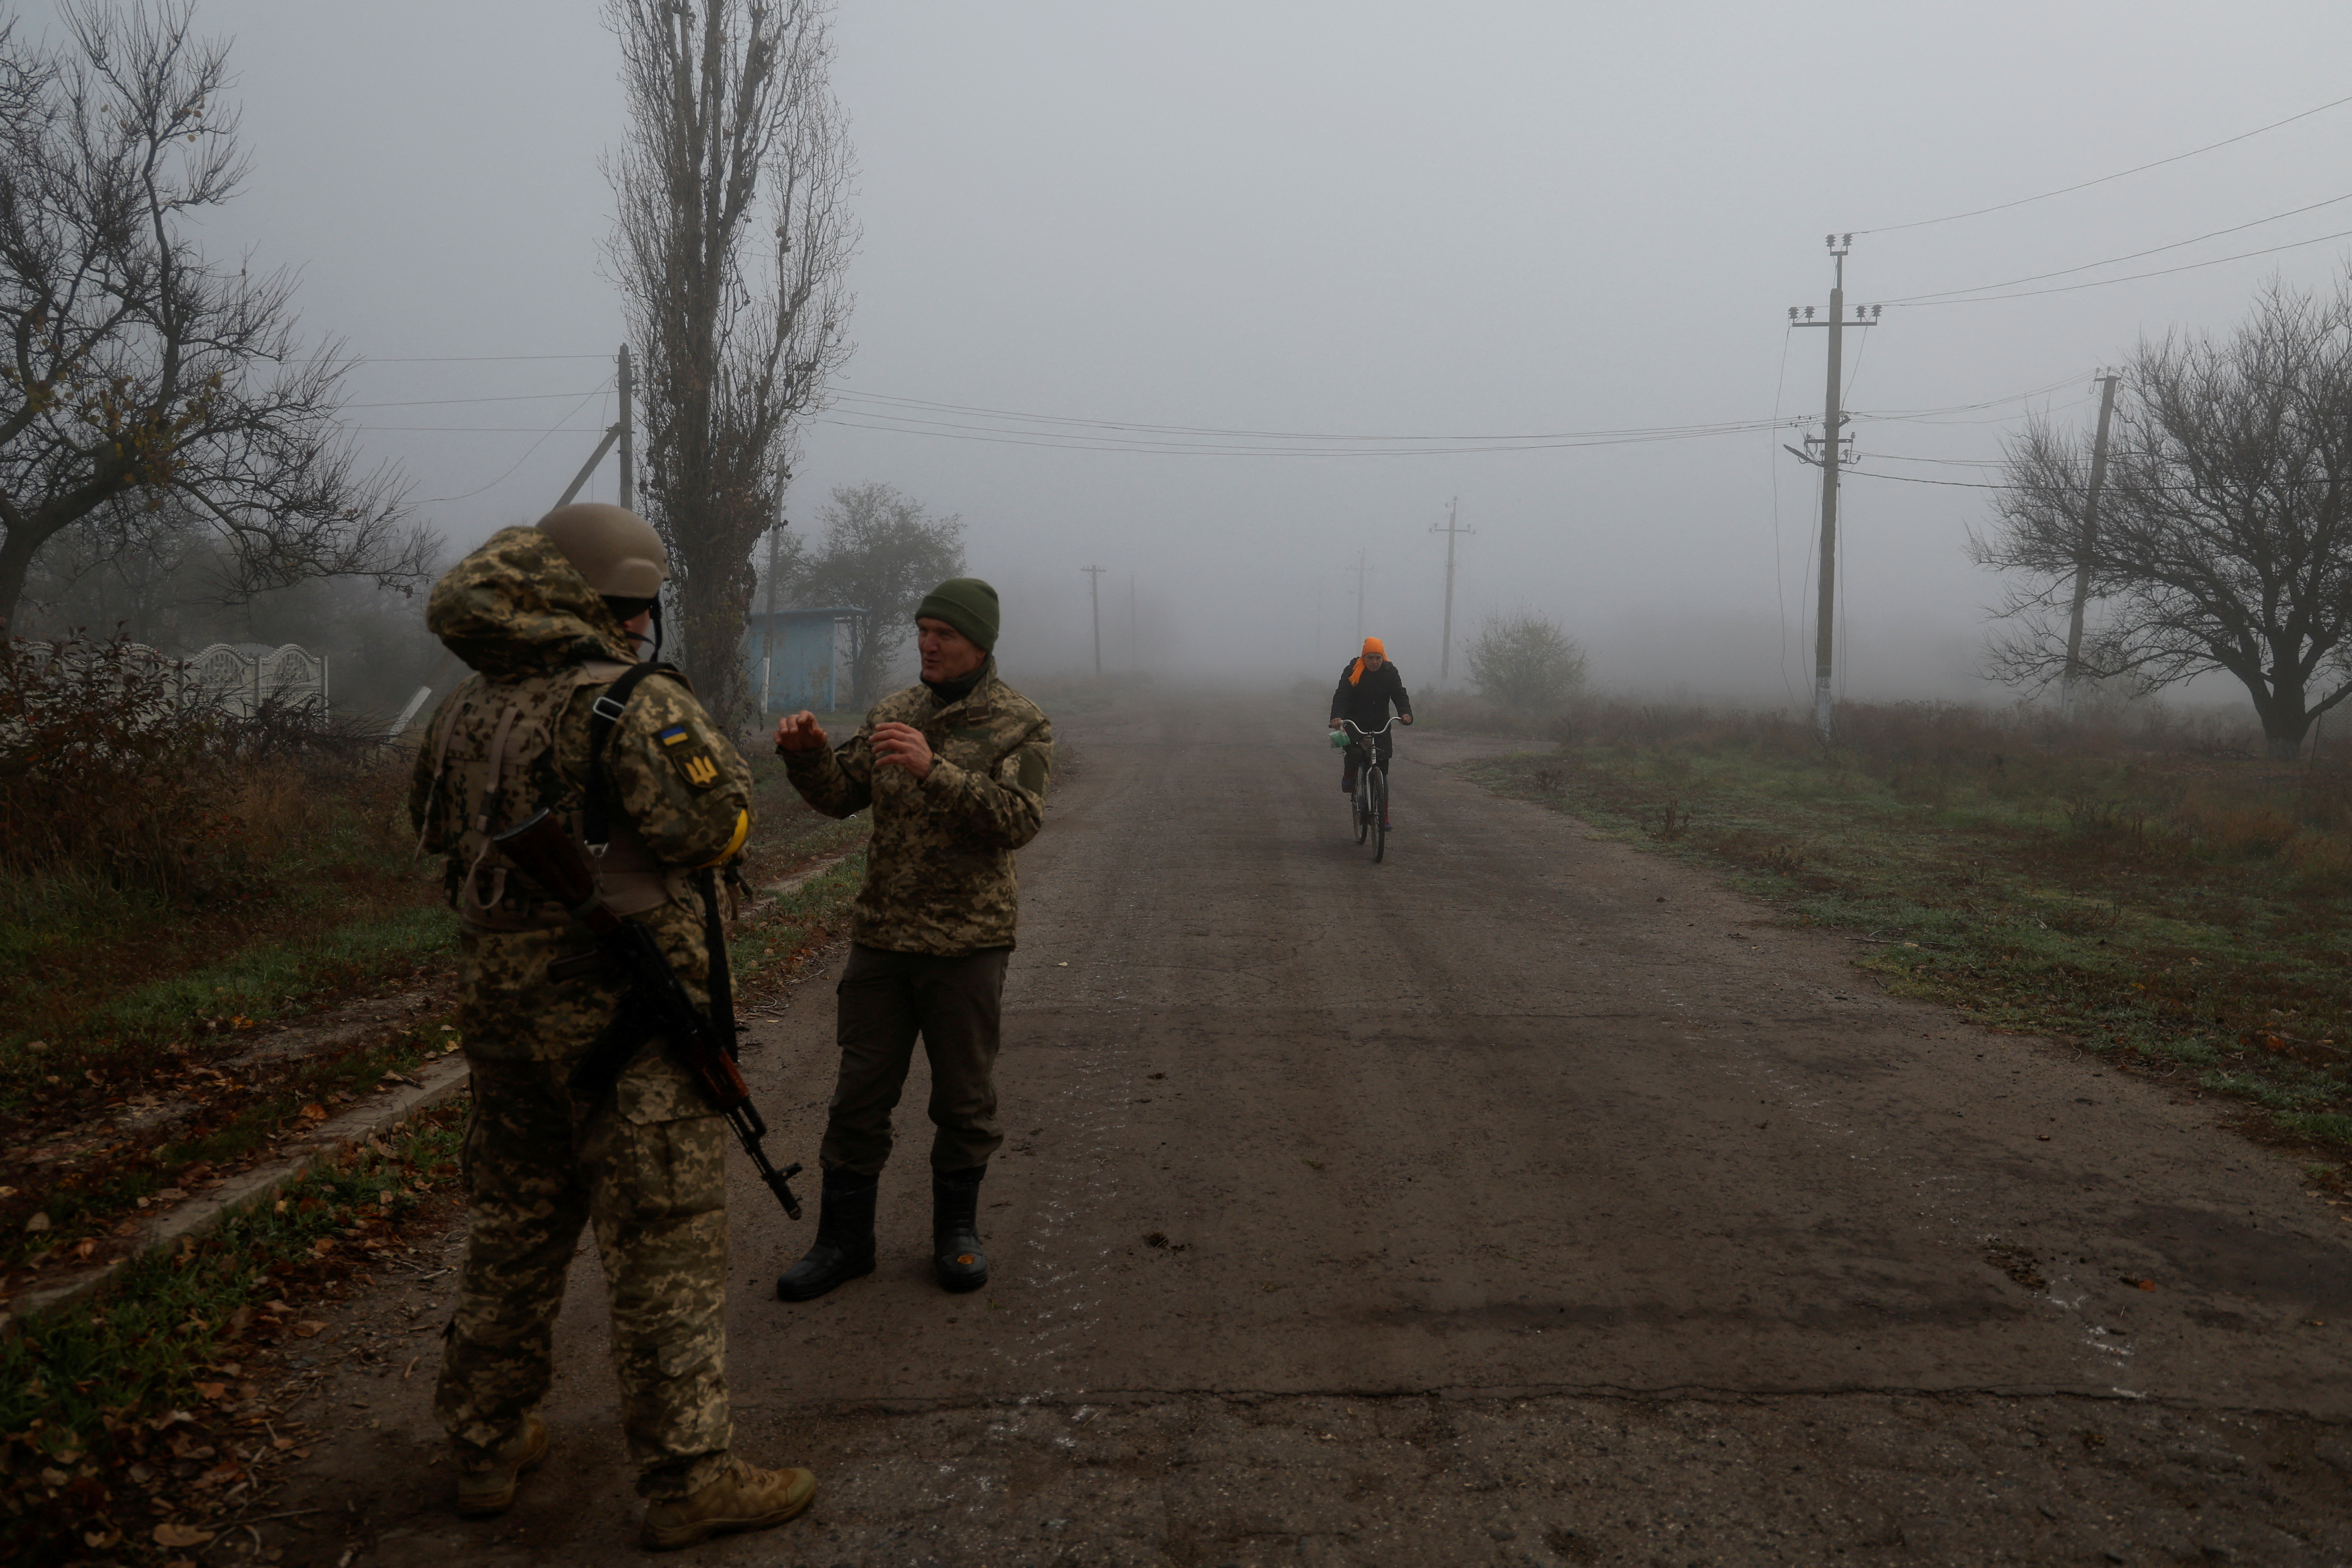 Ukrainian serviceman speaks with a chaplain while a local resident rides a bicycle along a street in a village near Shihurivka